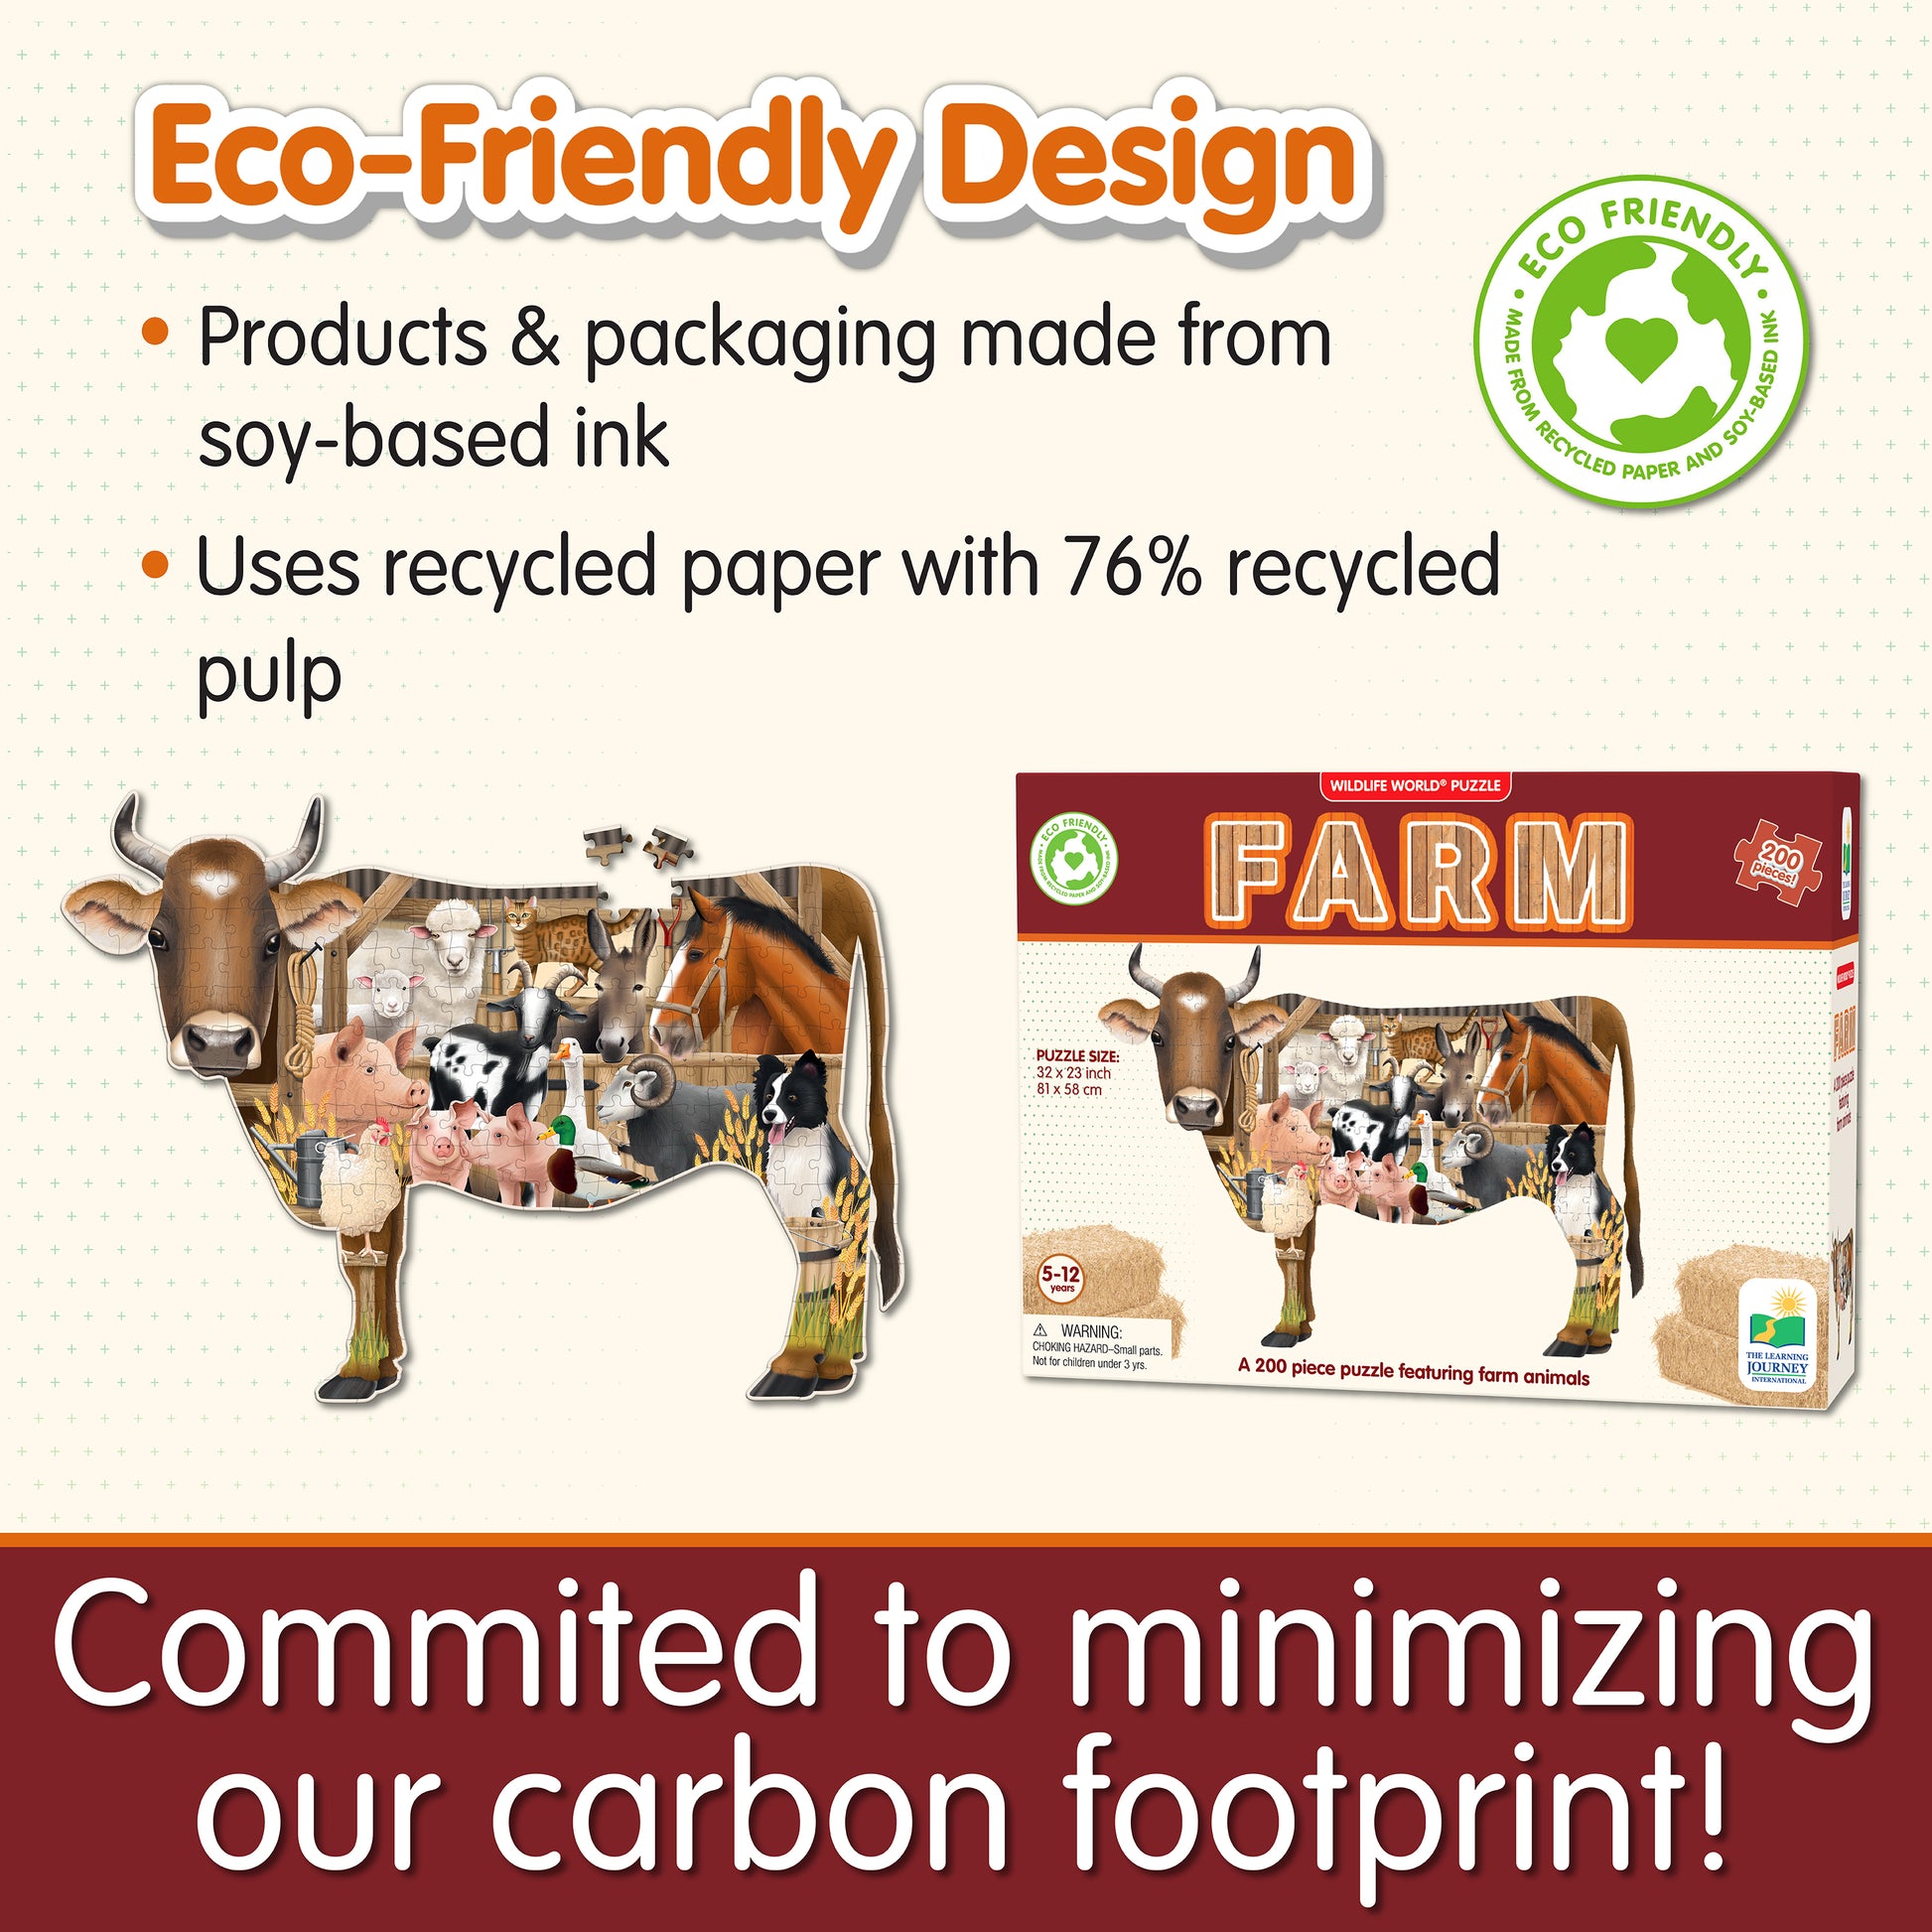 Infographic about Wildlife World Farm Puzzle's eco-friendly design that says, "Committed to minimizing our carbon footprint!"